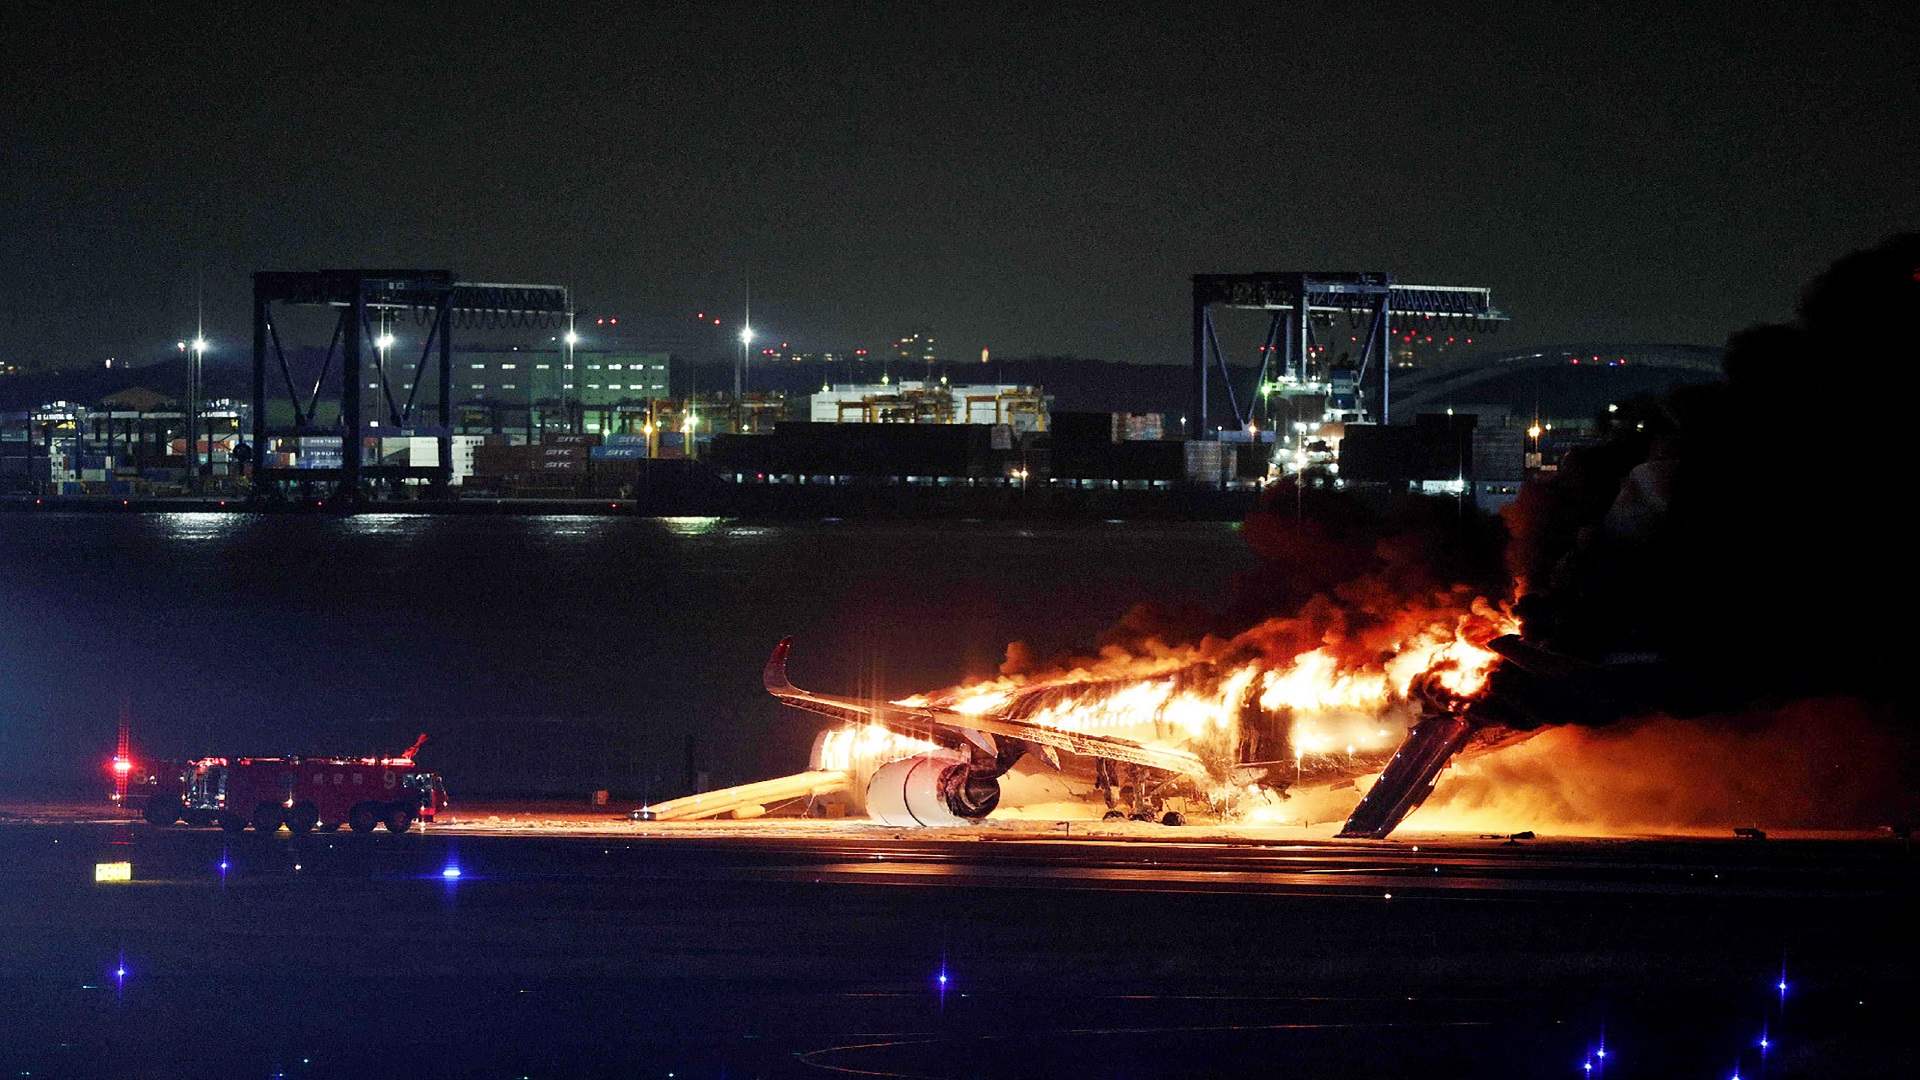 Fire breaks out on board an aircraft at Haneda Airport in Japan